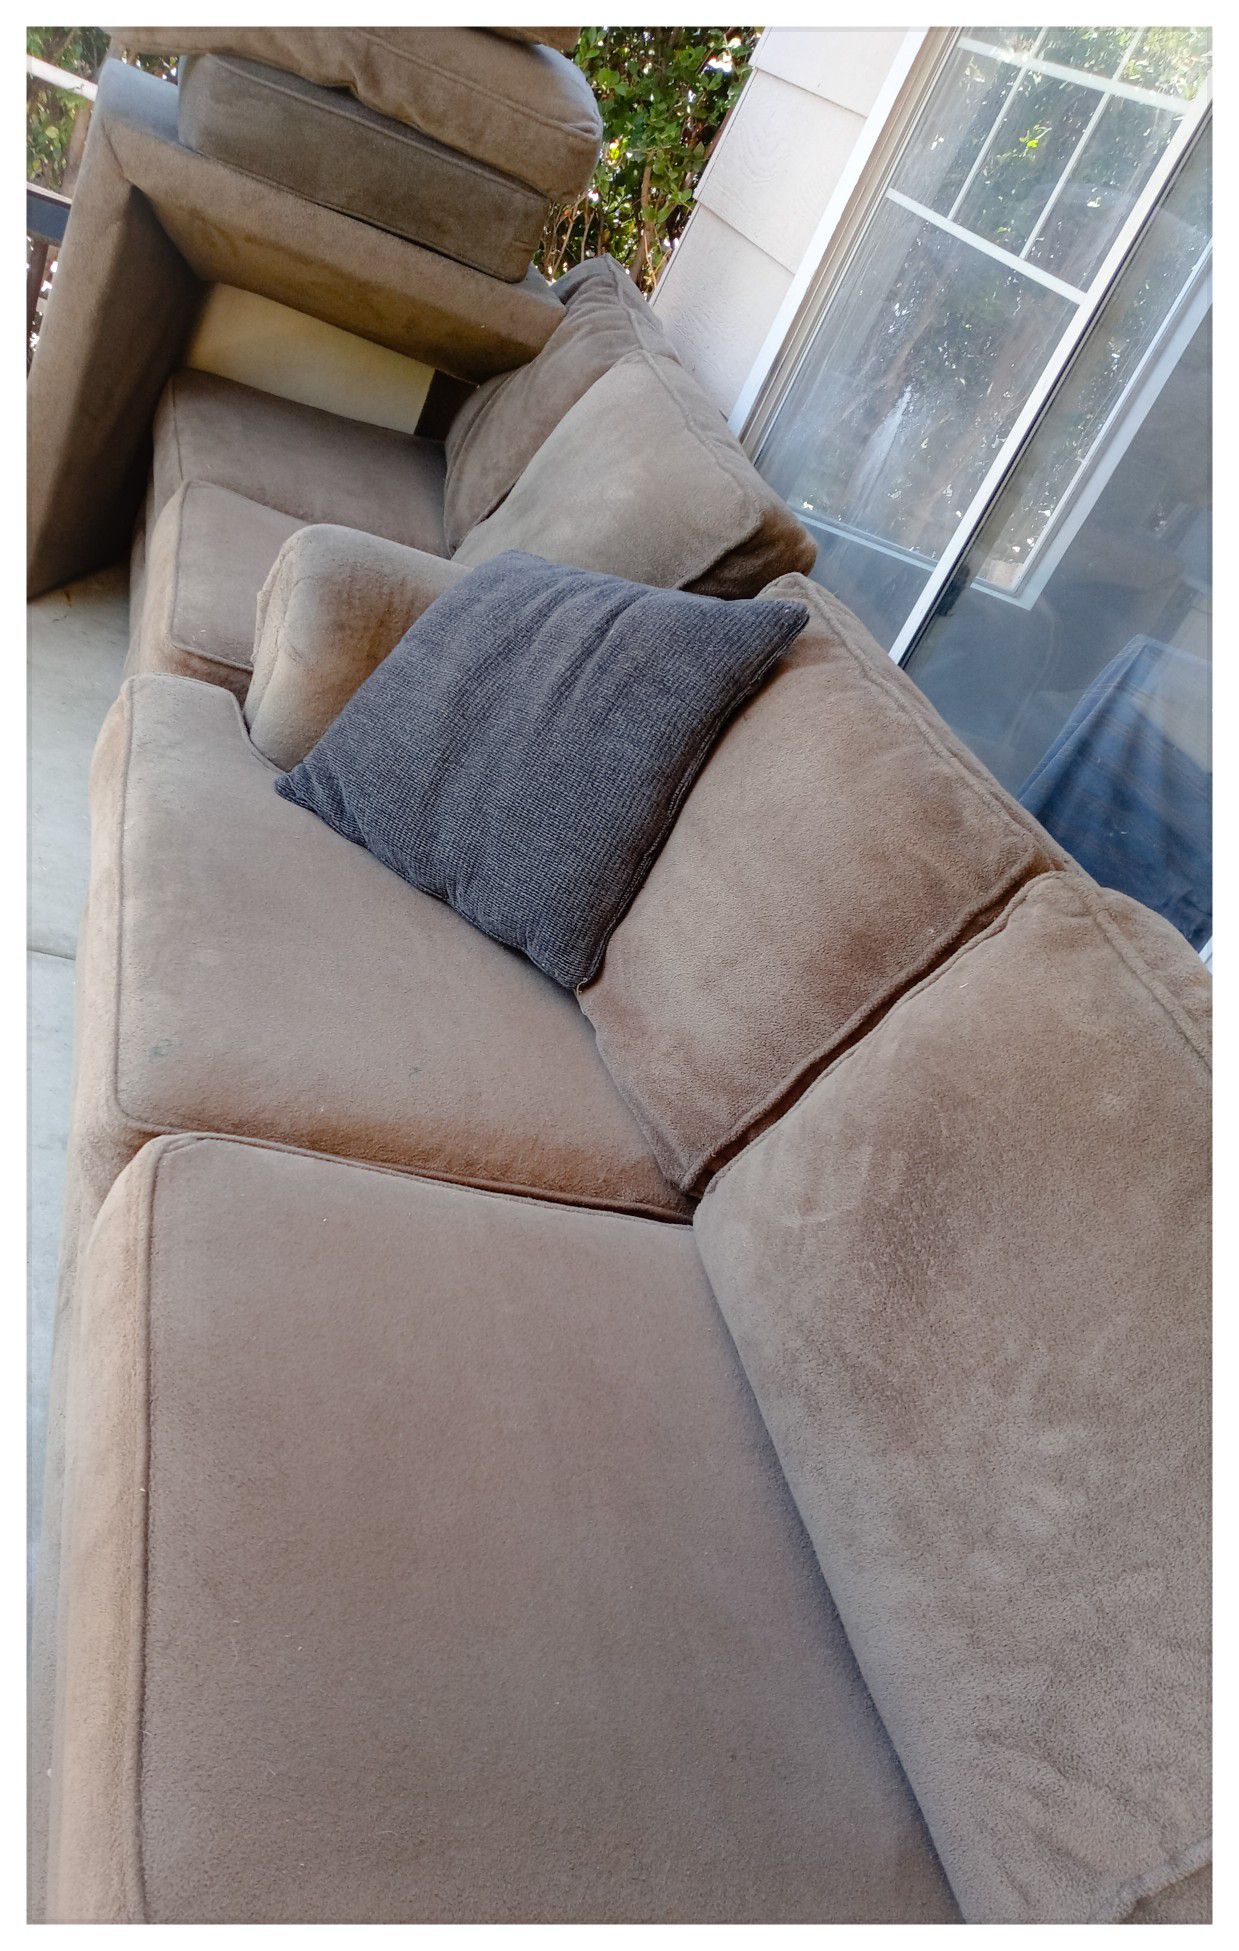 4 Piece Sectional Couch*TODAY ONLY!*